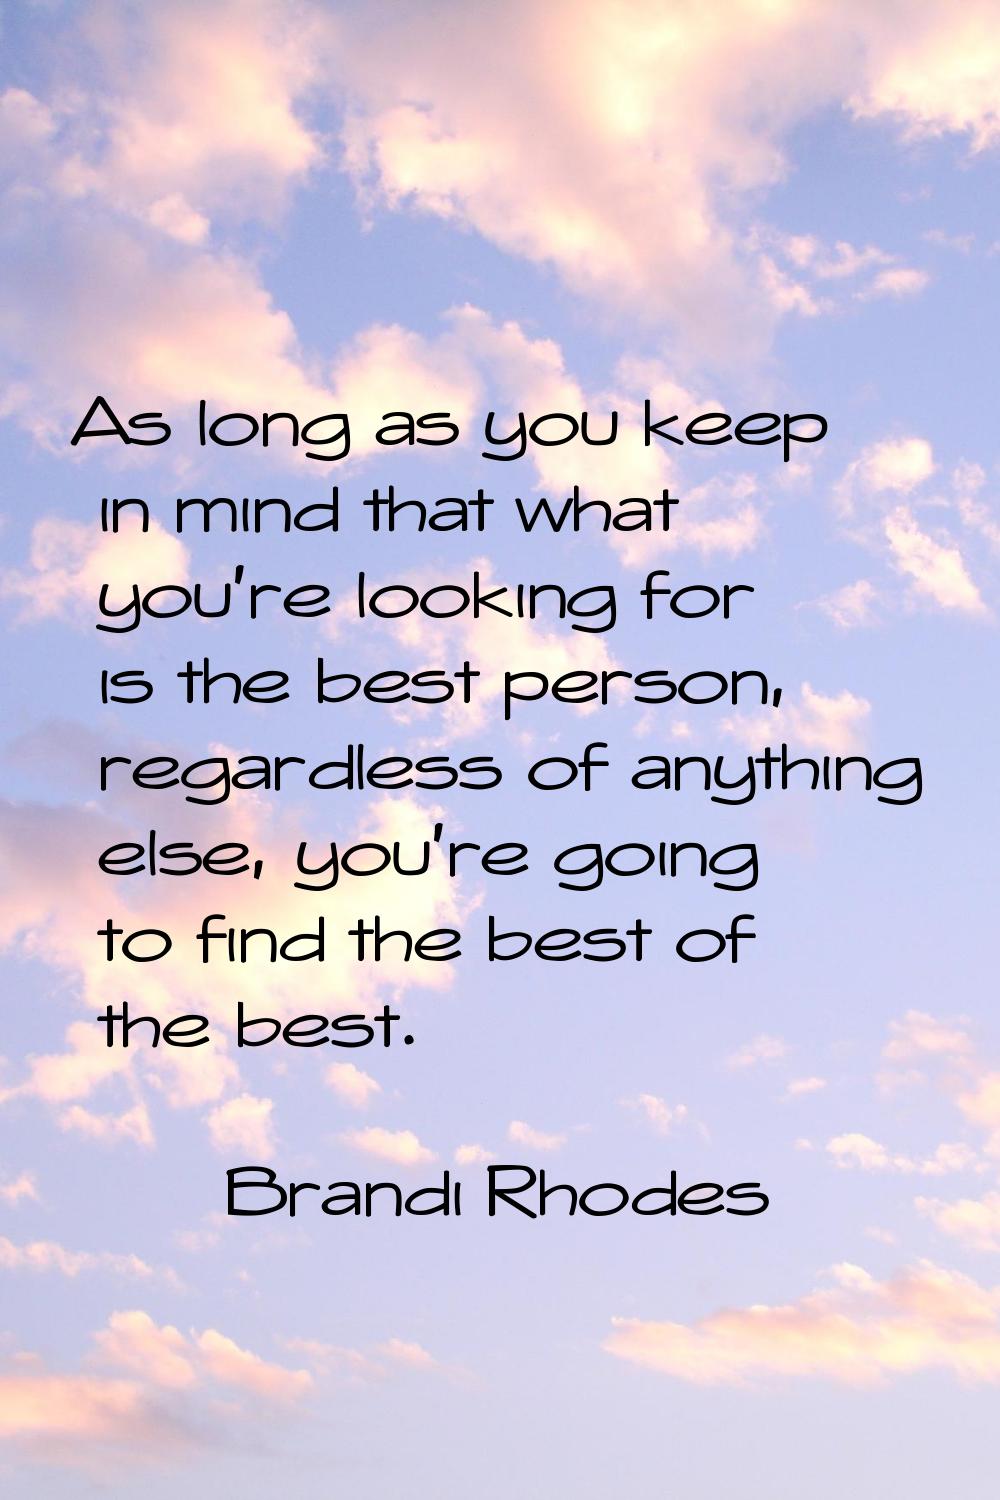 As long as you keep in mind that what you're looking for is the best person, regardless of anything